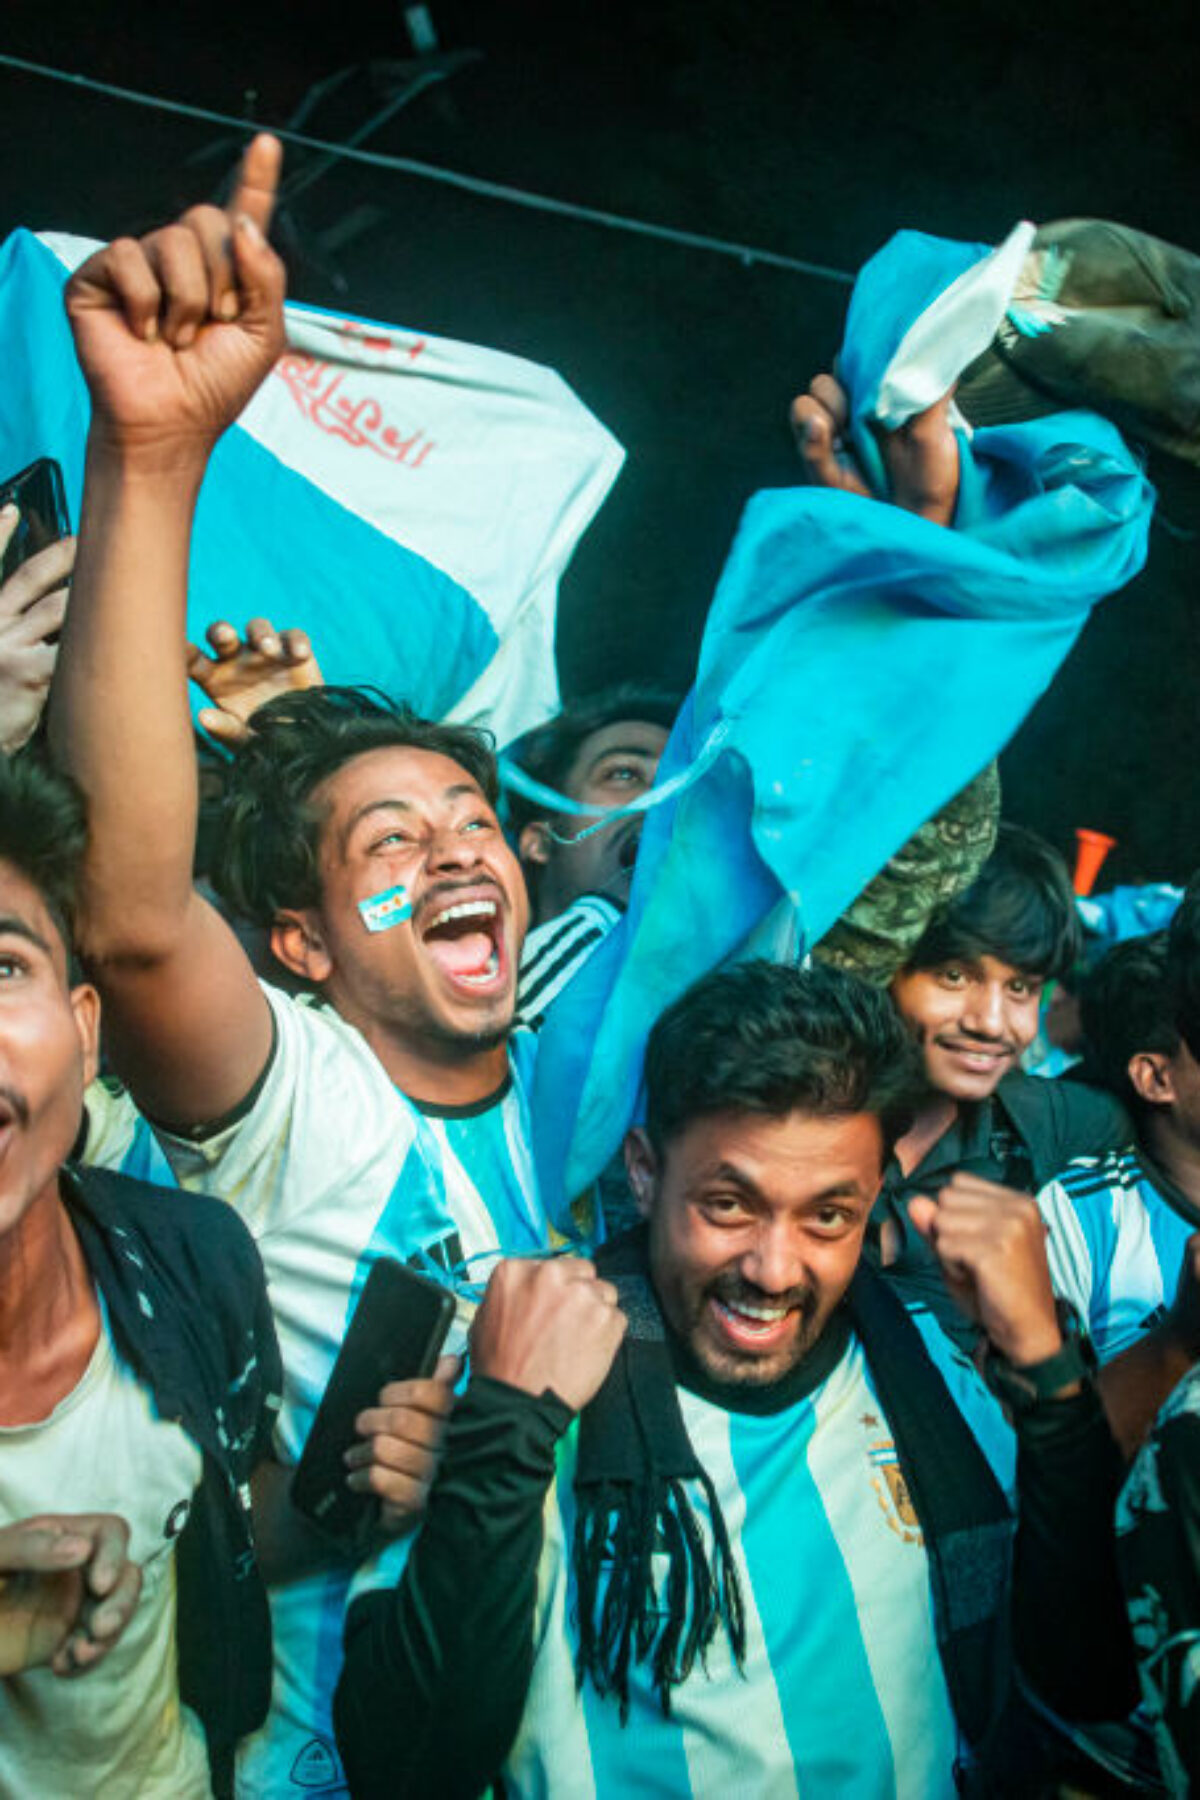 Football fans in Bangladesh celebrate after Argentina players scored a goal as they watch the Qatar 2022 World Cup Group C football match between Argentina and Poland on a big screen, the Dhaka University area, on December 1, 2022.